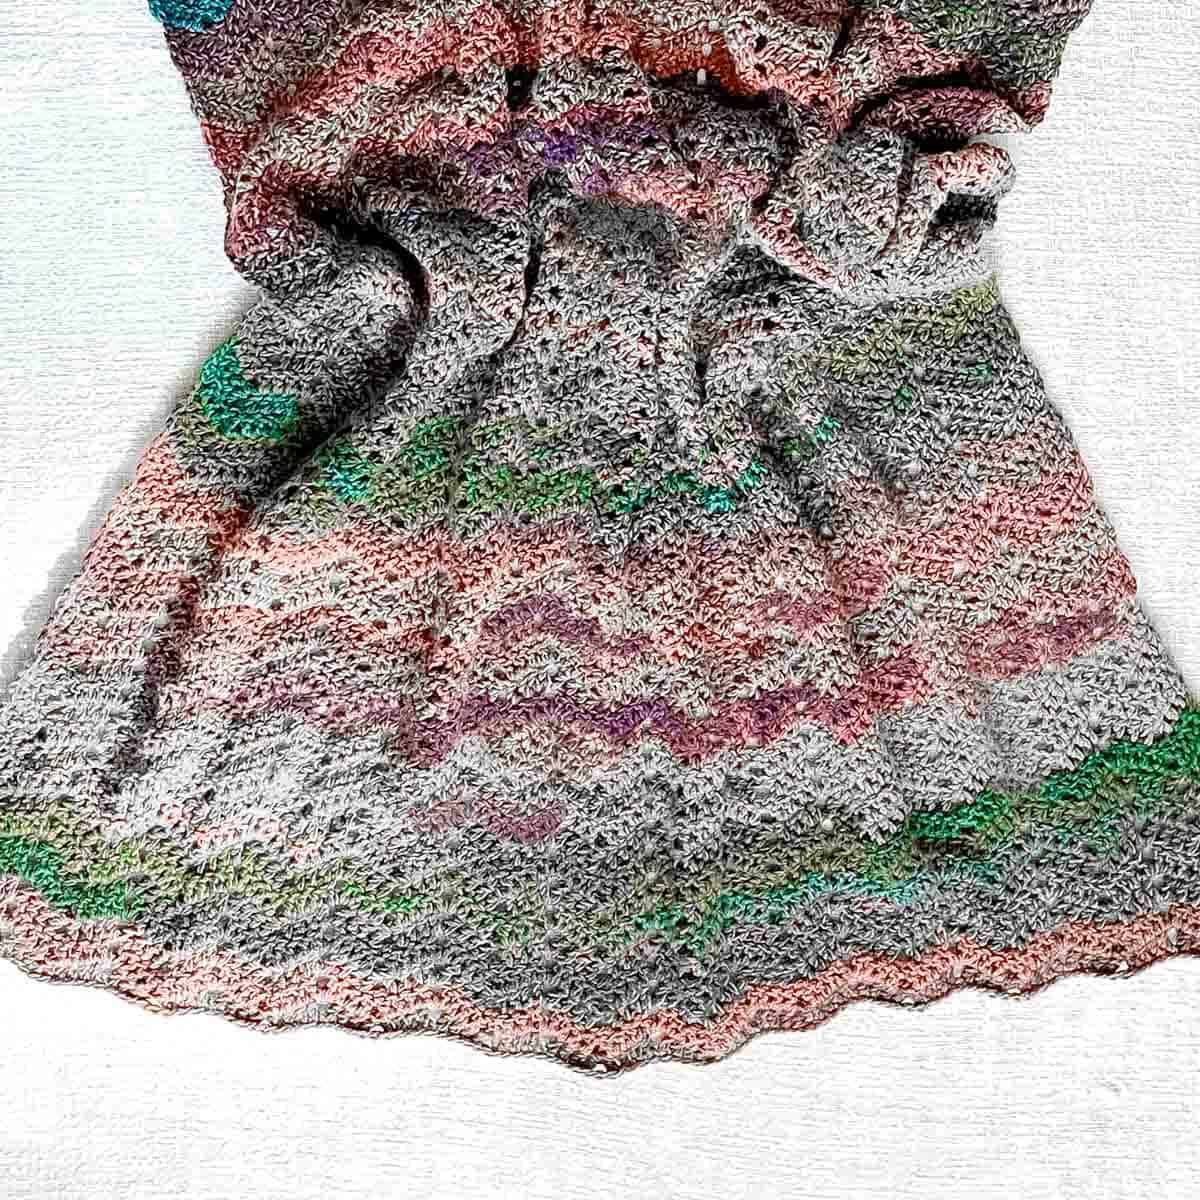 A crumpled crochet blanket on laid on a plain background.